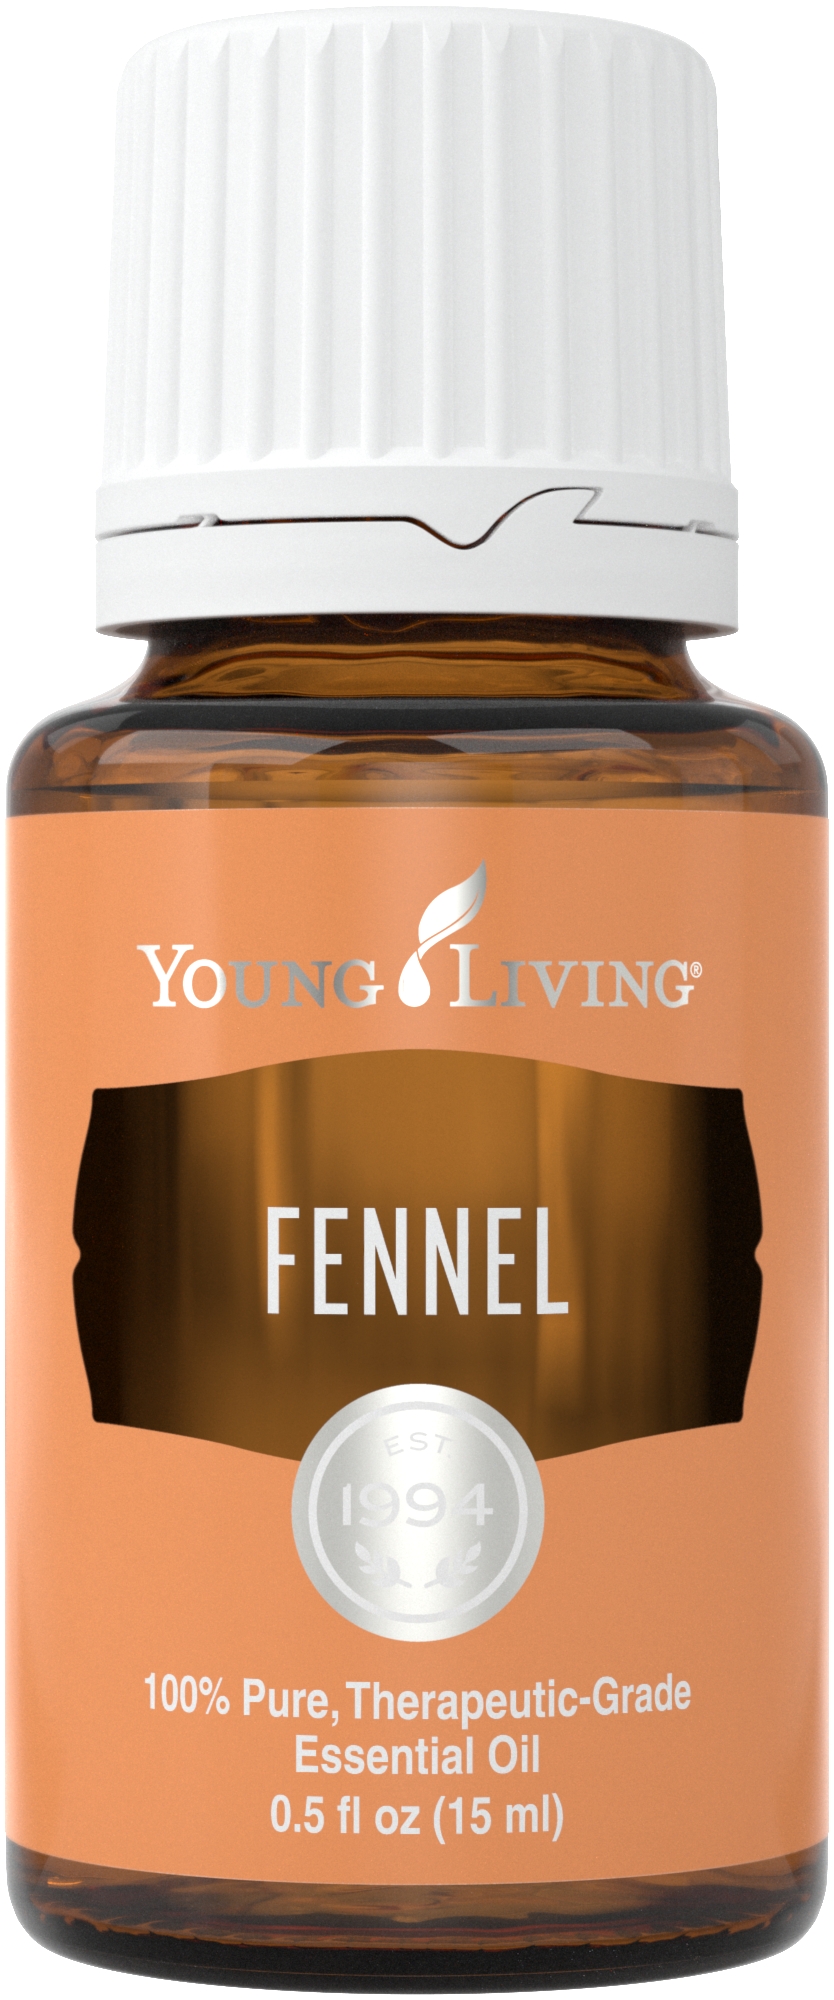 Fennel essential oil | Young Living essential oil